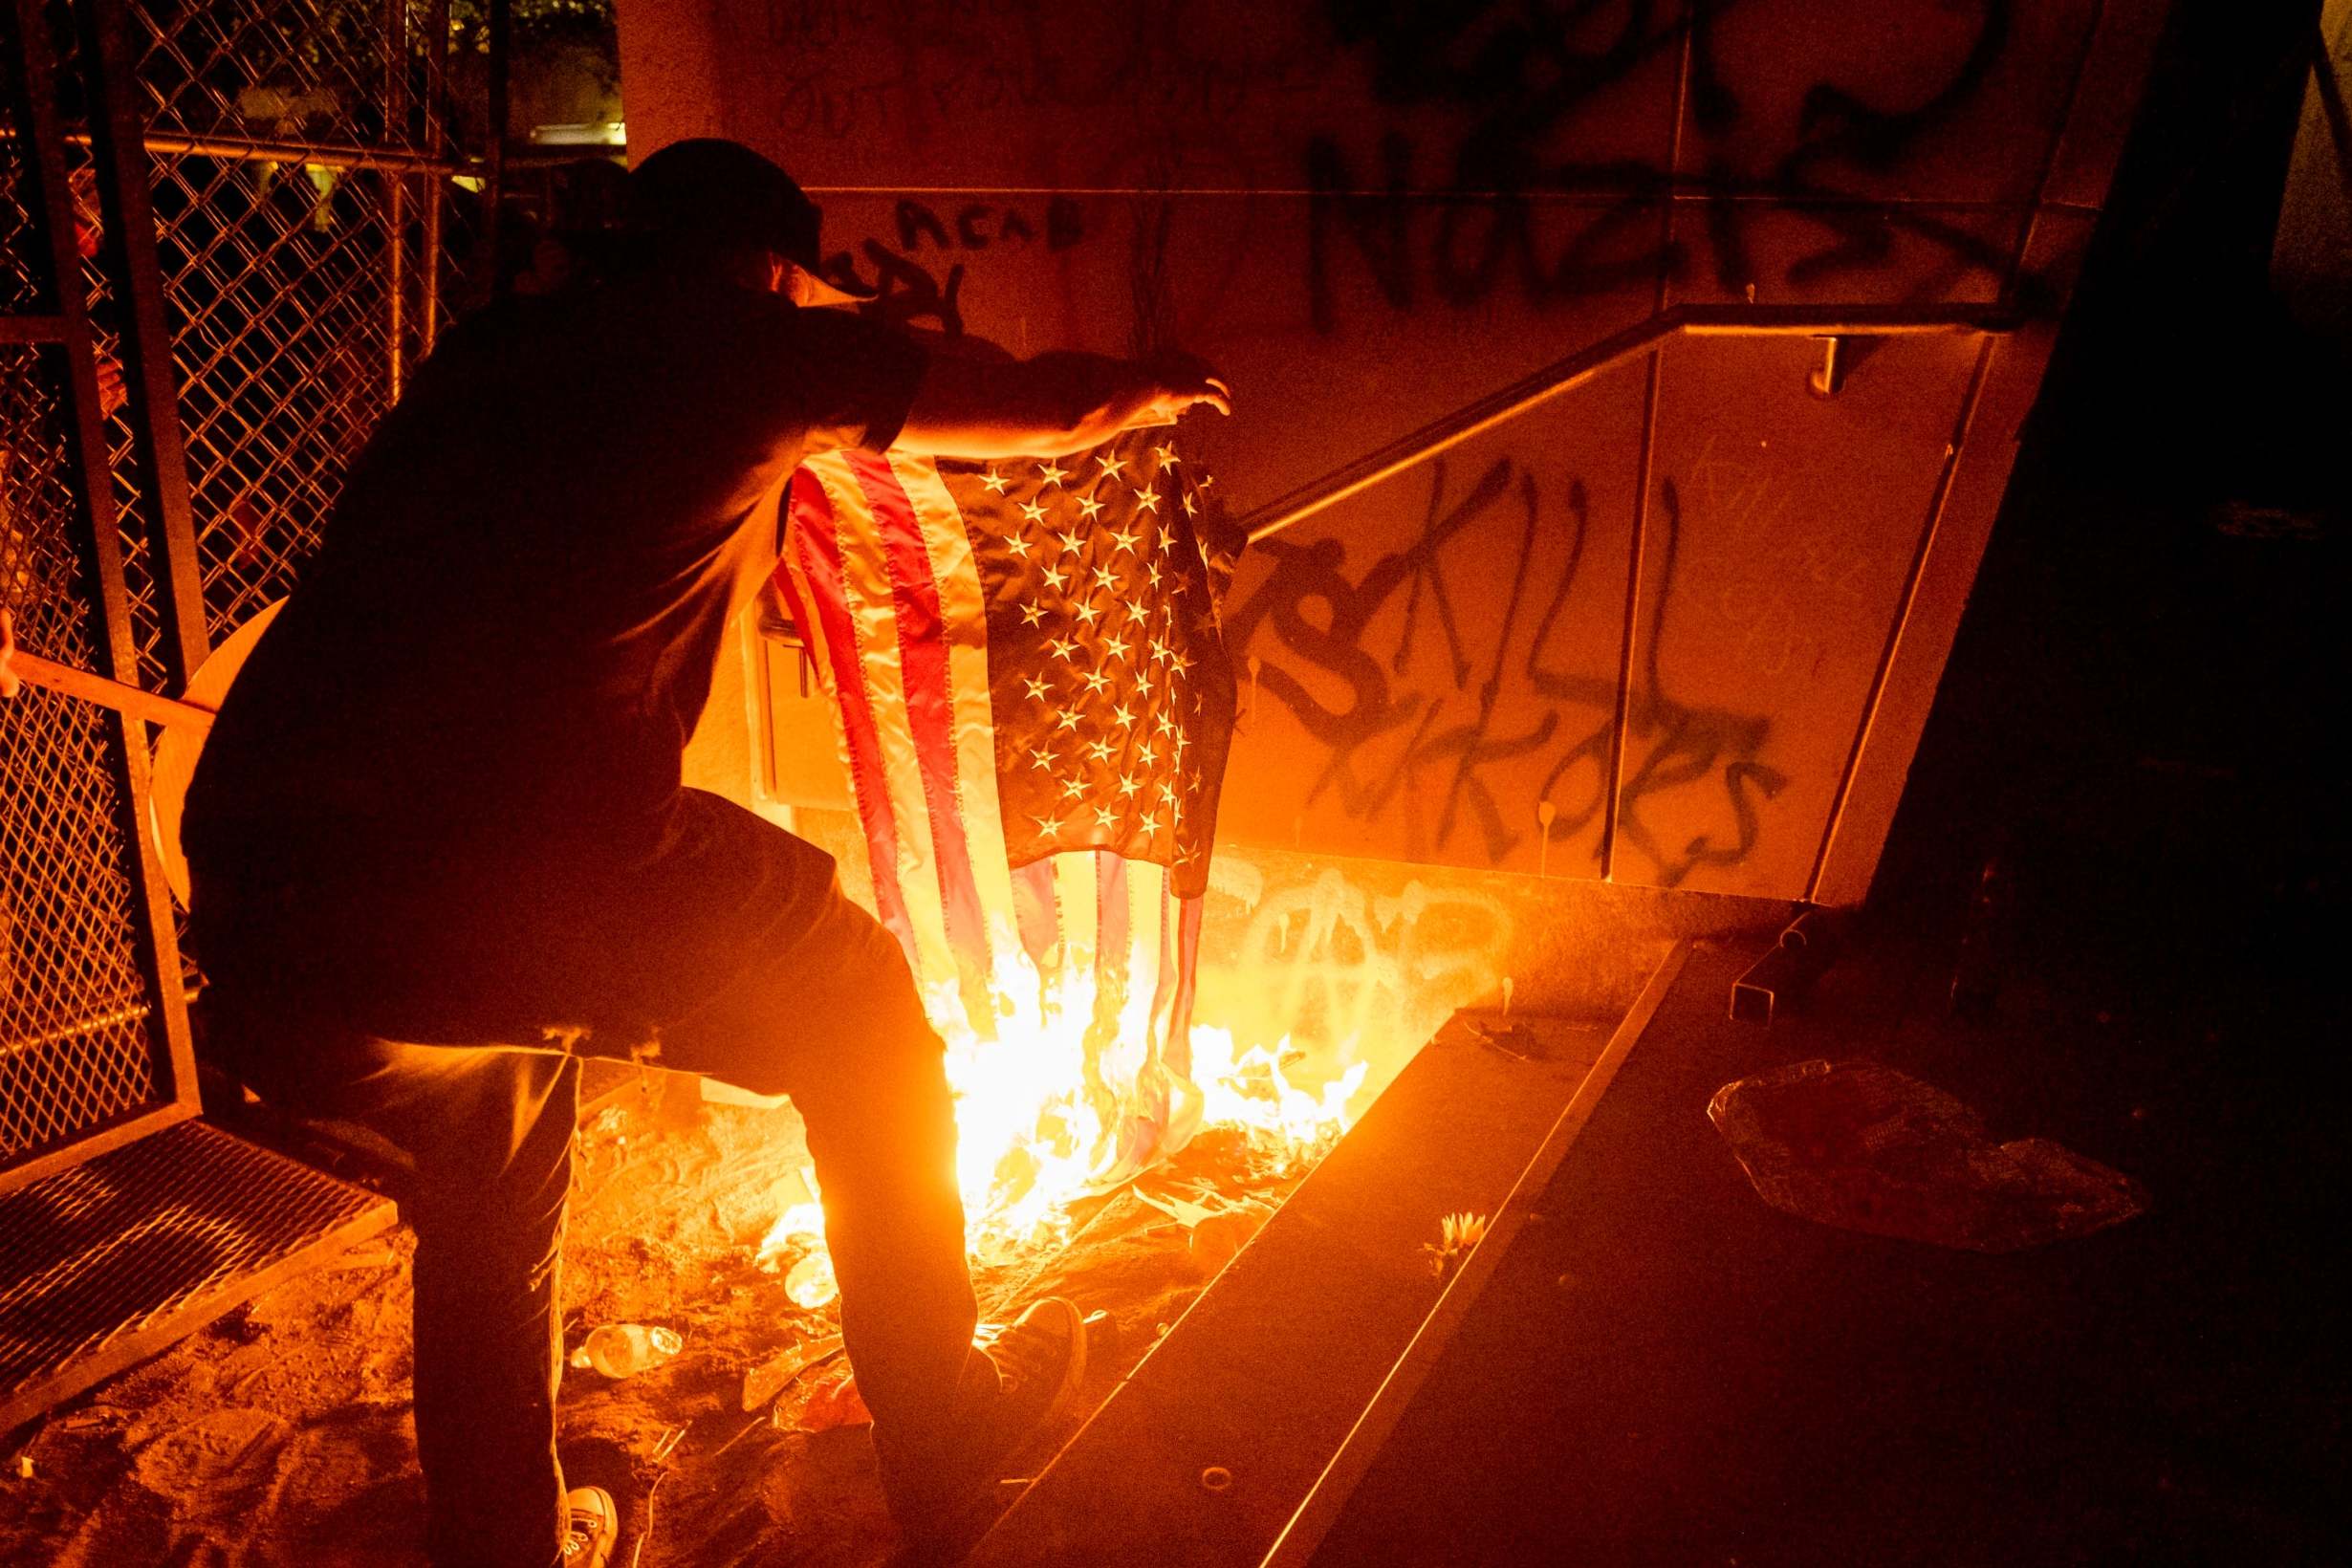 A Black Lives Matter protester burns an American flag outside the Mark O. Hatfield United States Courthouse in July 2020